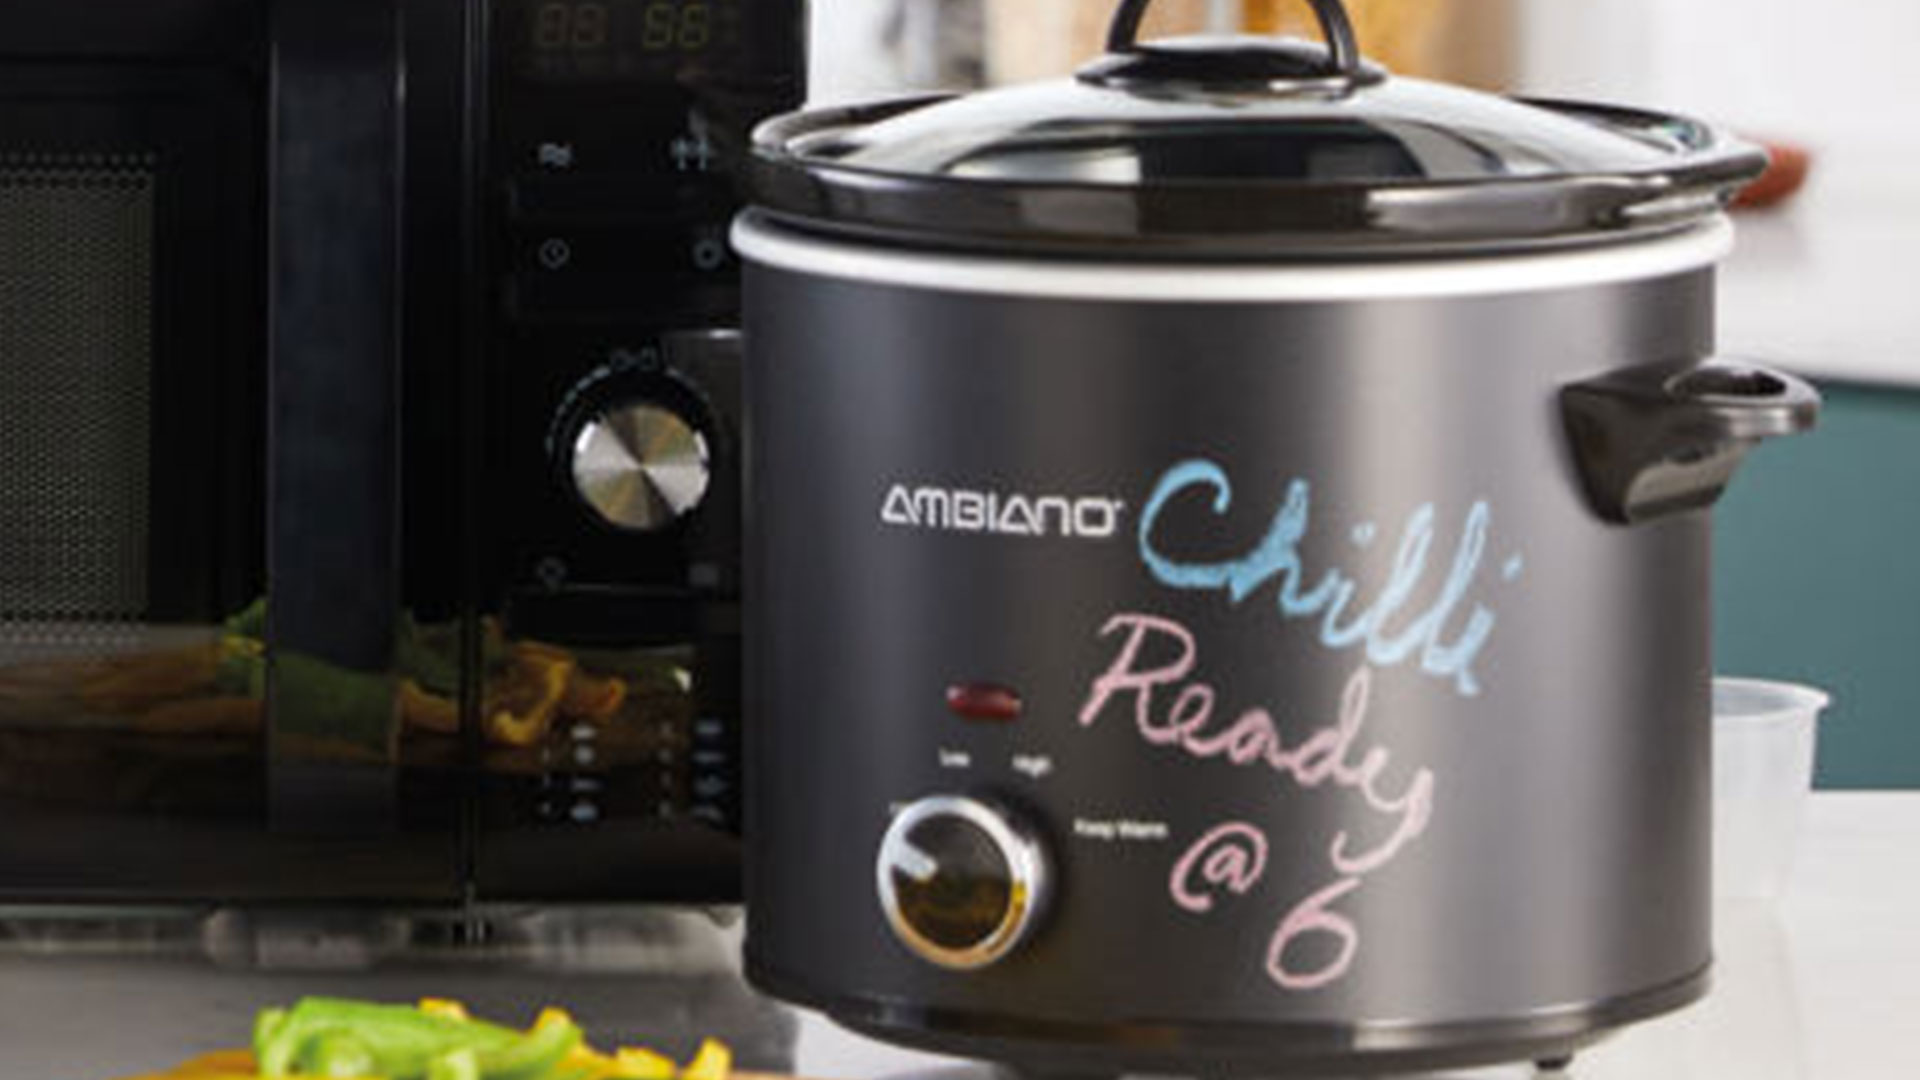 Aldi shoppers rave about £20 slow cooker which is saving them a bundle in the kitchen